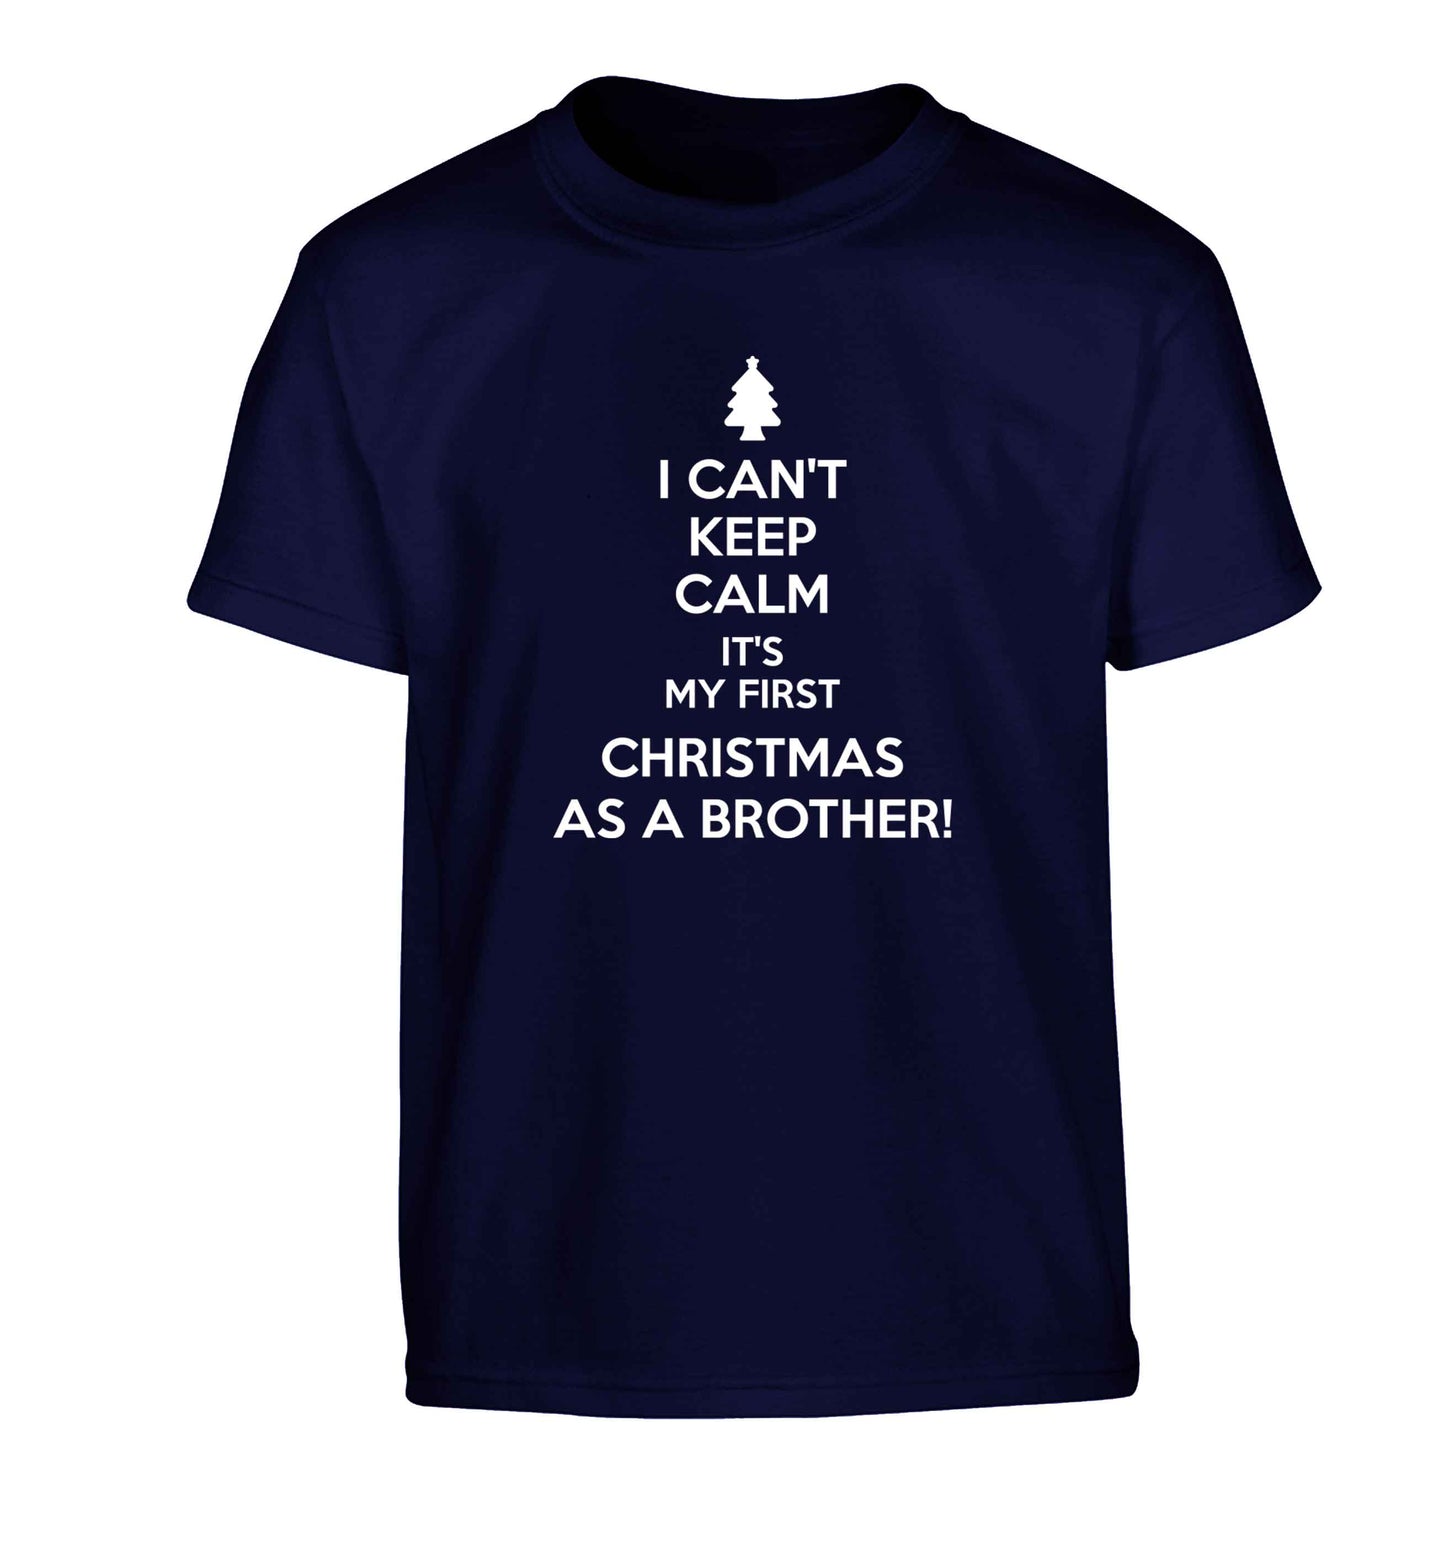 I can't keep calm it's my first Christmas as a brother! Children's navy Tshirt 12-13 Years